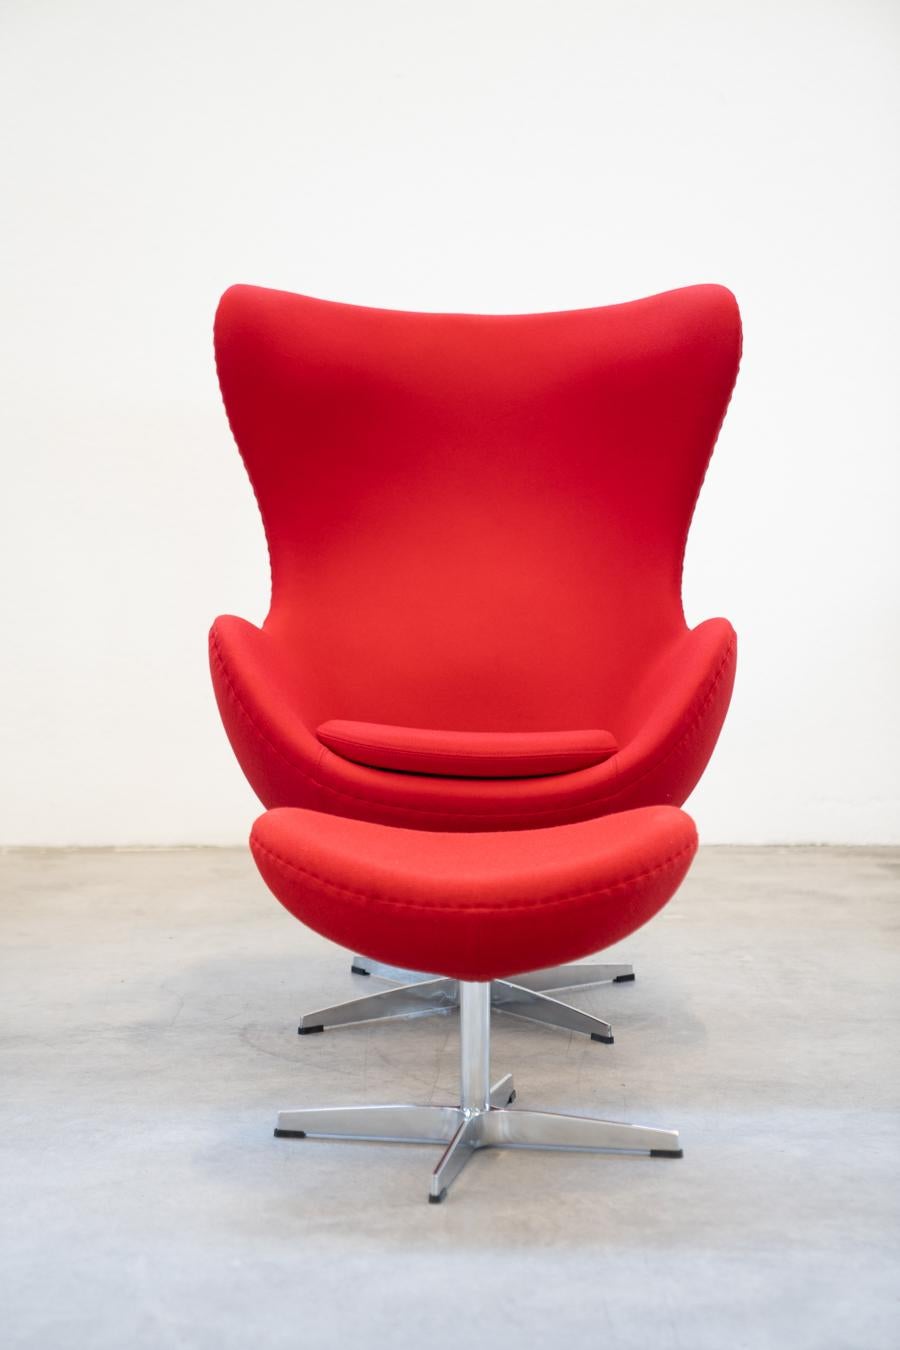 EGG CHAIR armchair with ottoman 1980/1990
Designed by Arne Jacobsen for Fritz Hansen, Egg has a structure 	made of polyurethane foam with glass fiber reinforcement. La 	foam for upholstery and seat cushion are polyurethane 	cold-expanded. Egg has an